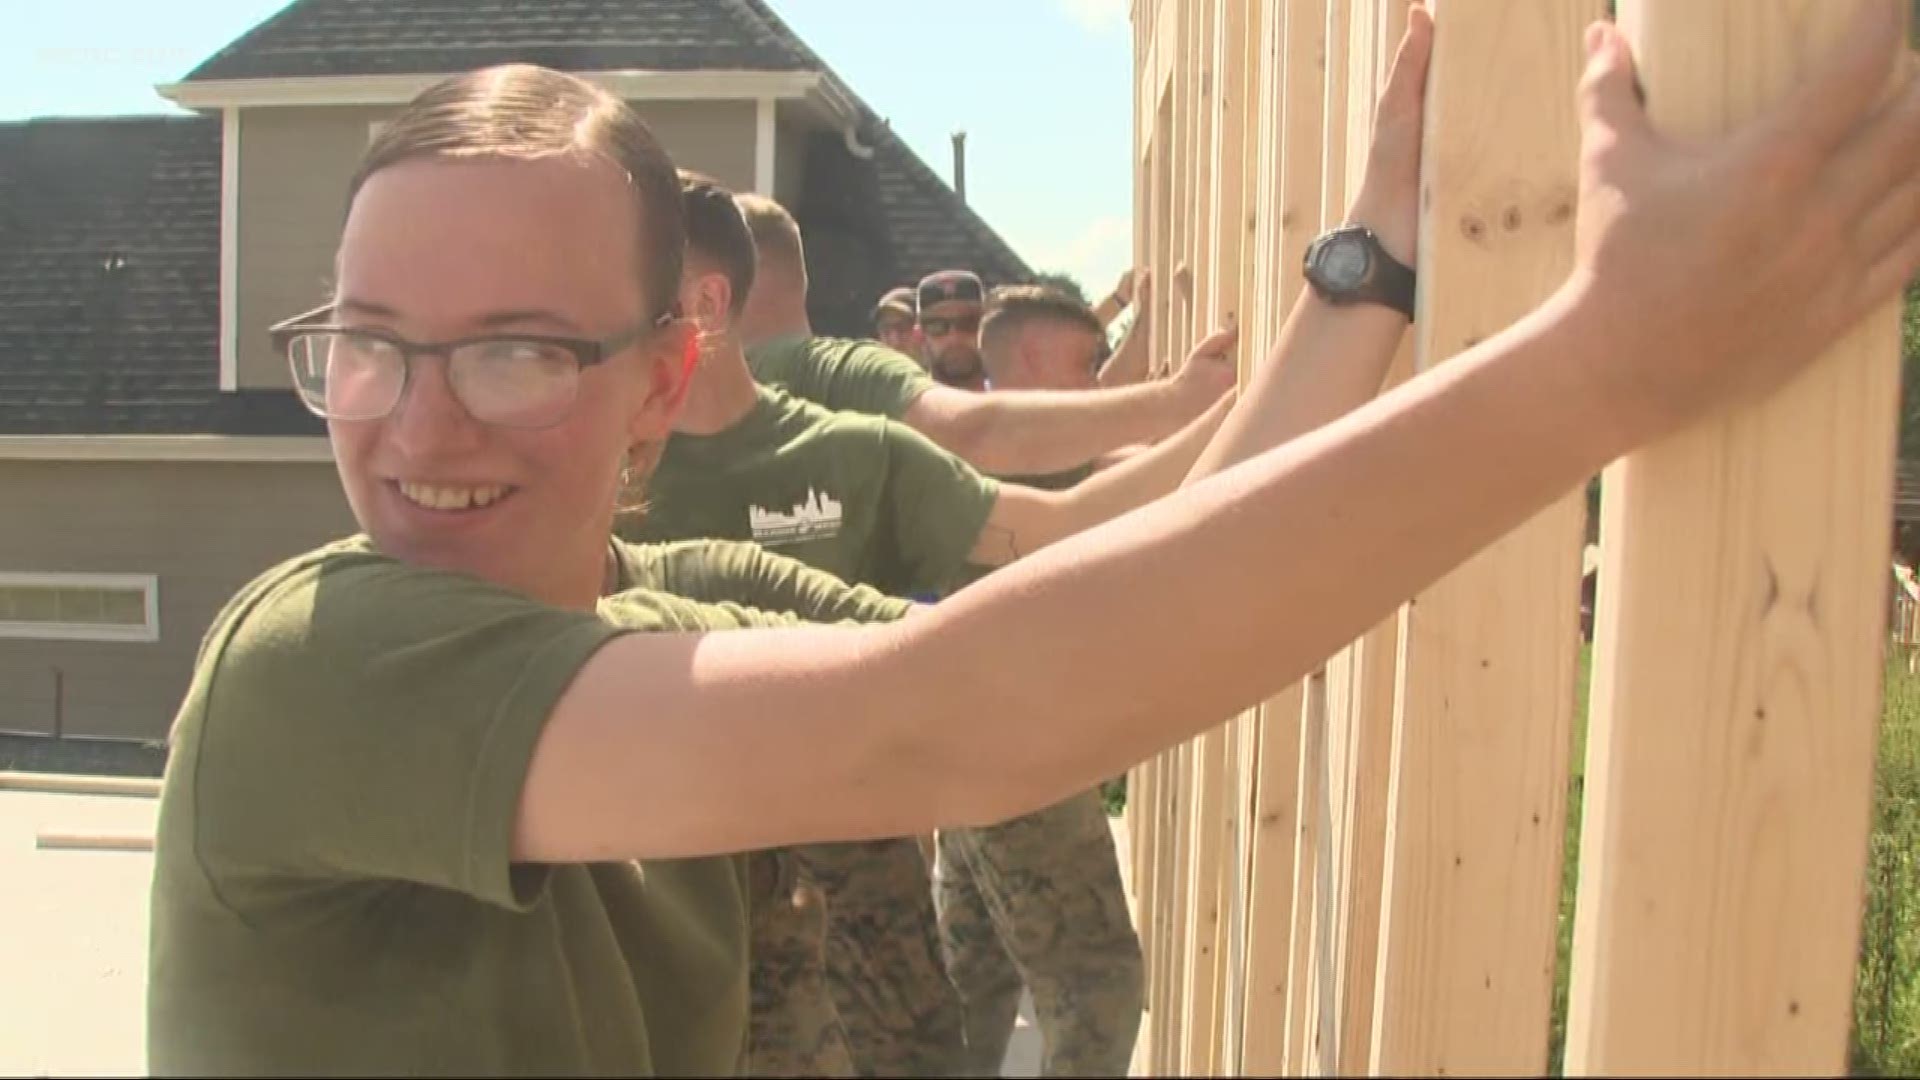 More than a dozen marines came together today to help with a special mission. They teamed up with the local nonprofit Purple Heart Homes to build a house for a marine veteran who was injured in the line of duty.